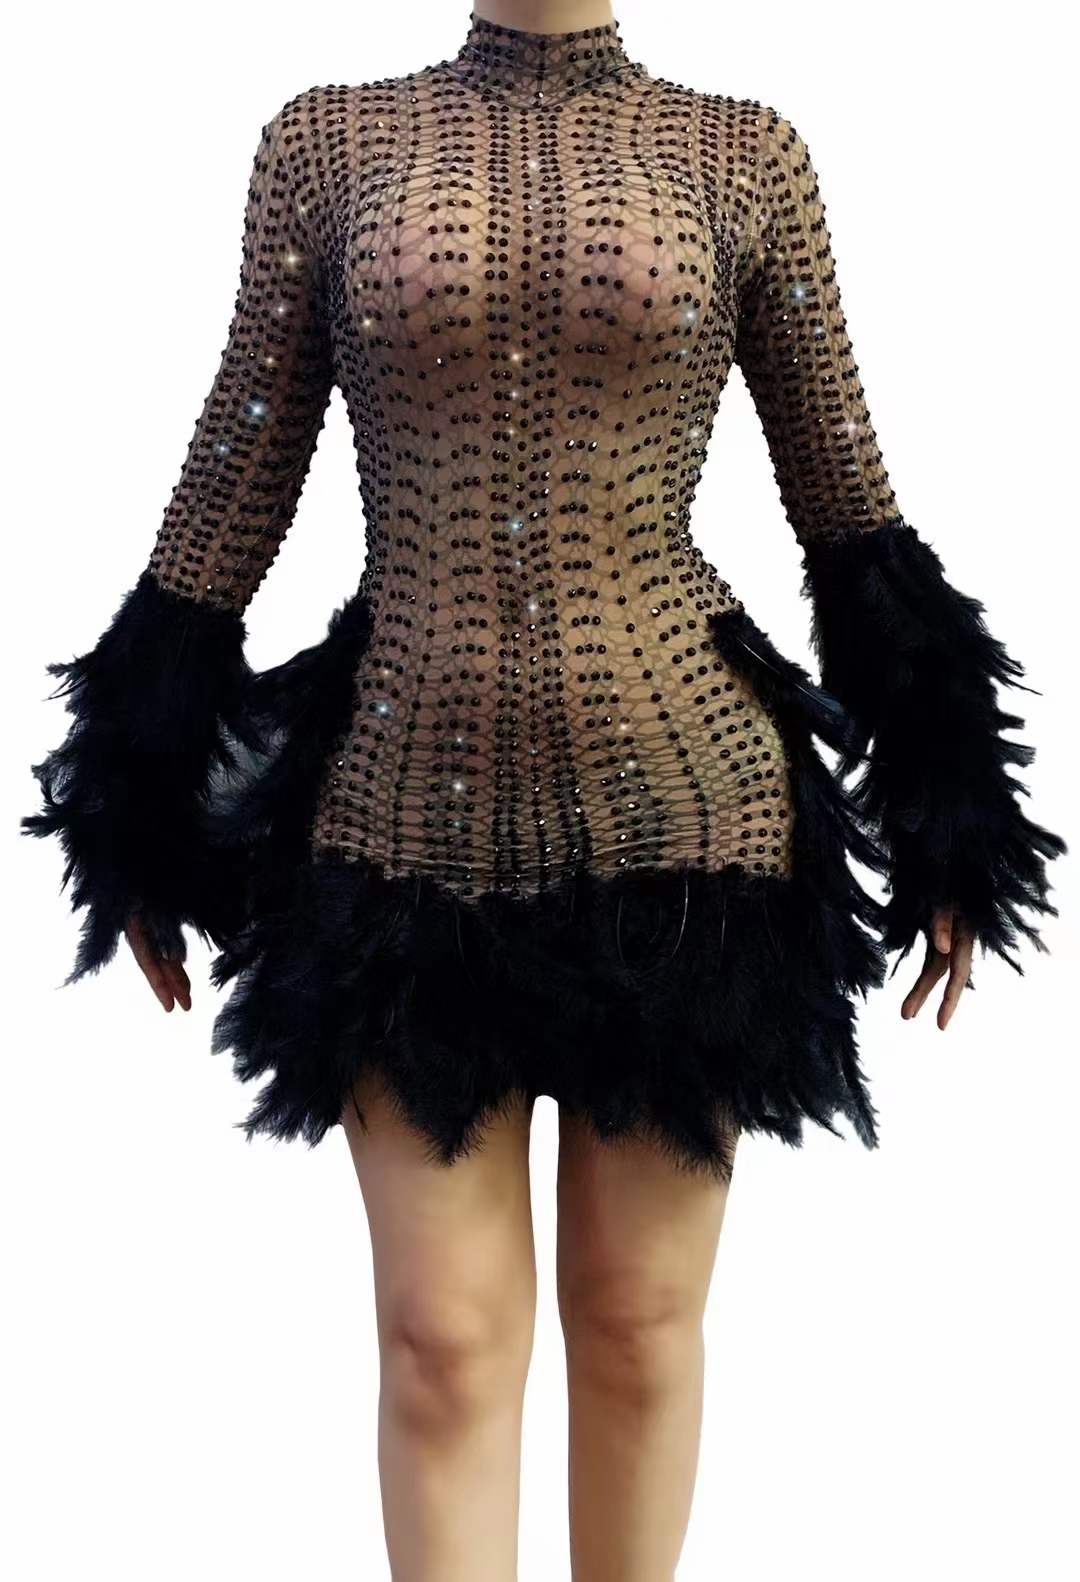 Birthday Dress Feather Black Rhinestone Sparkly Women Short Dresses Singer Dance Costume Queen Outfit Long Sleeve Stage Wear